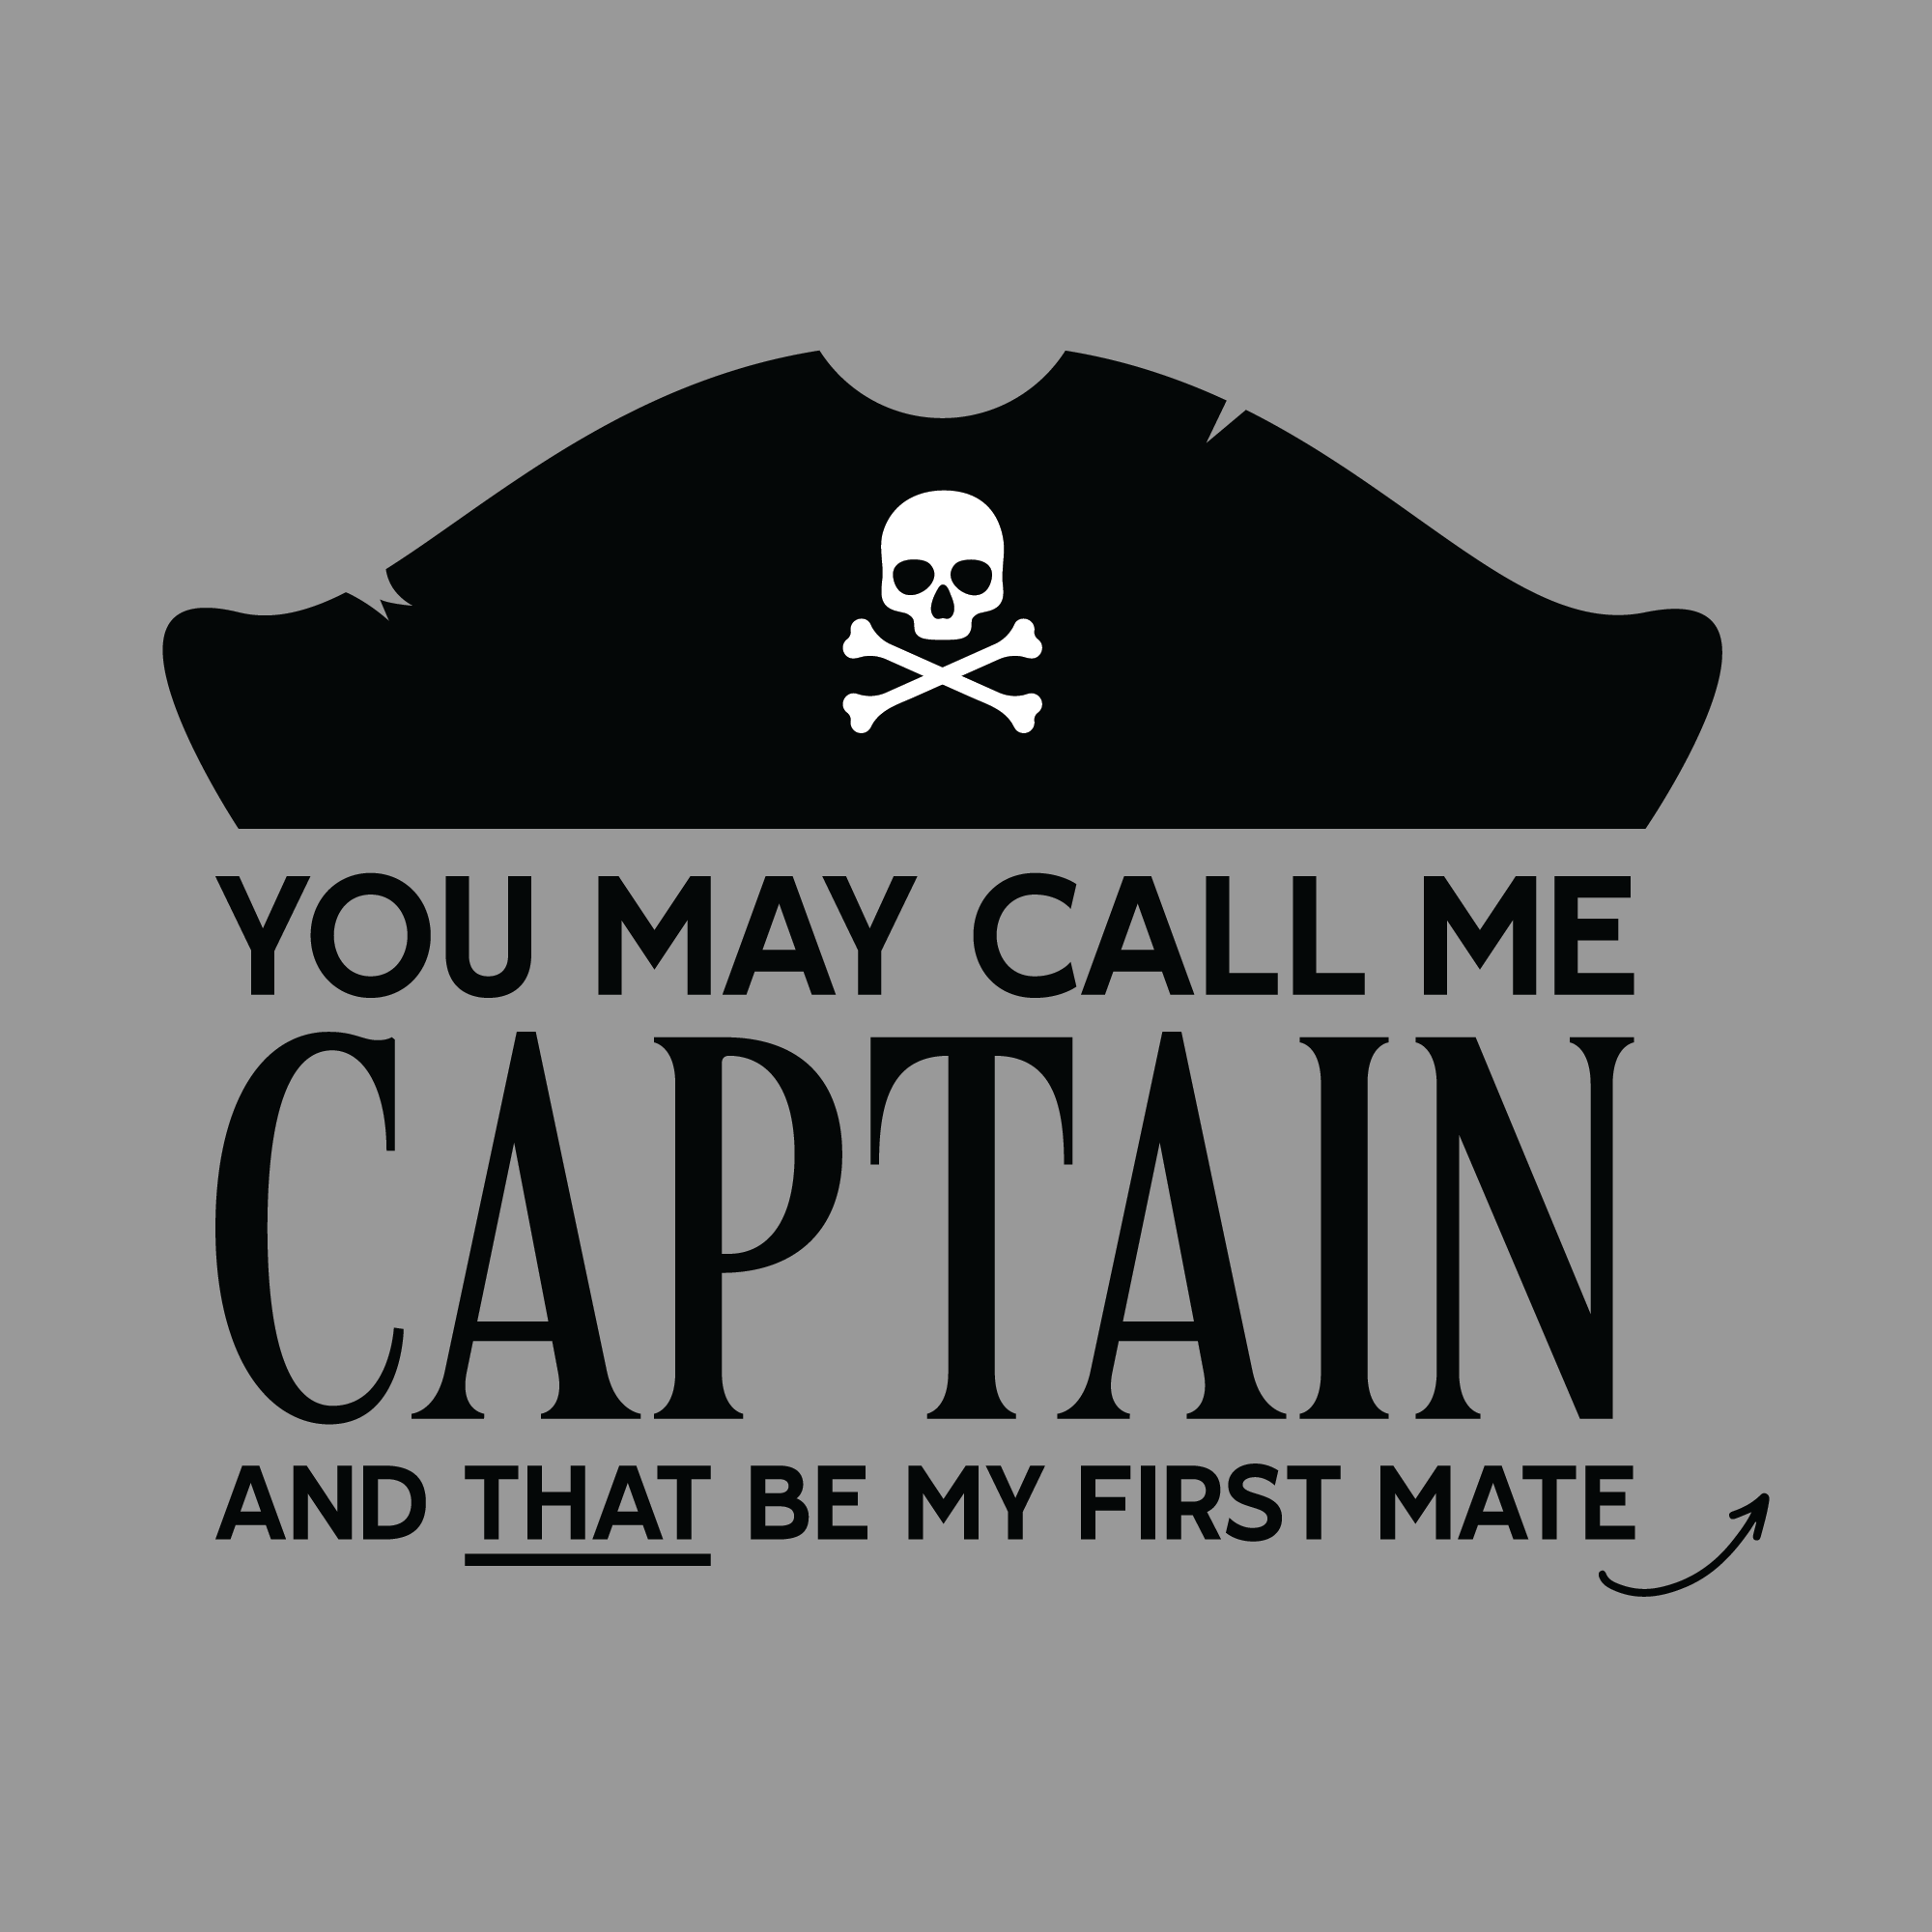 Who can be called captain?